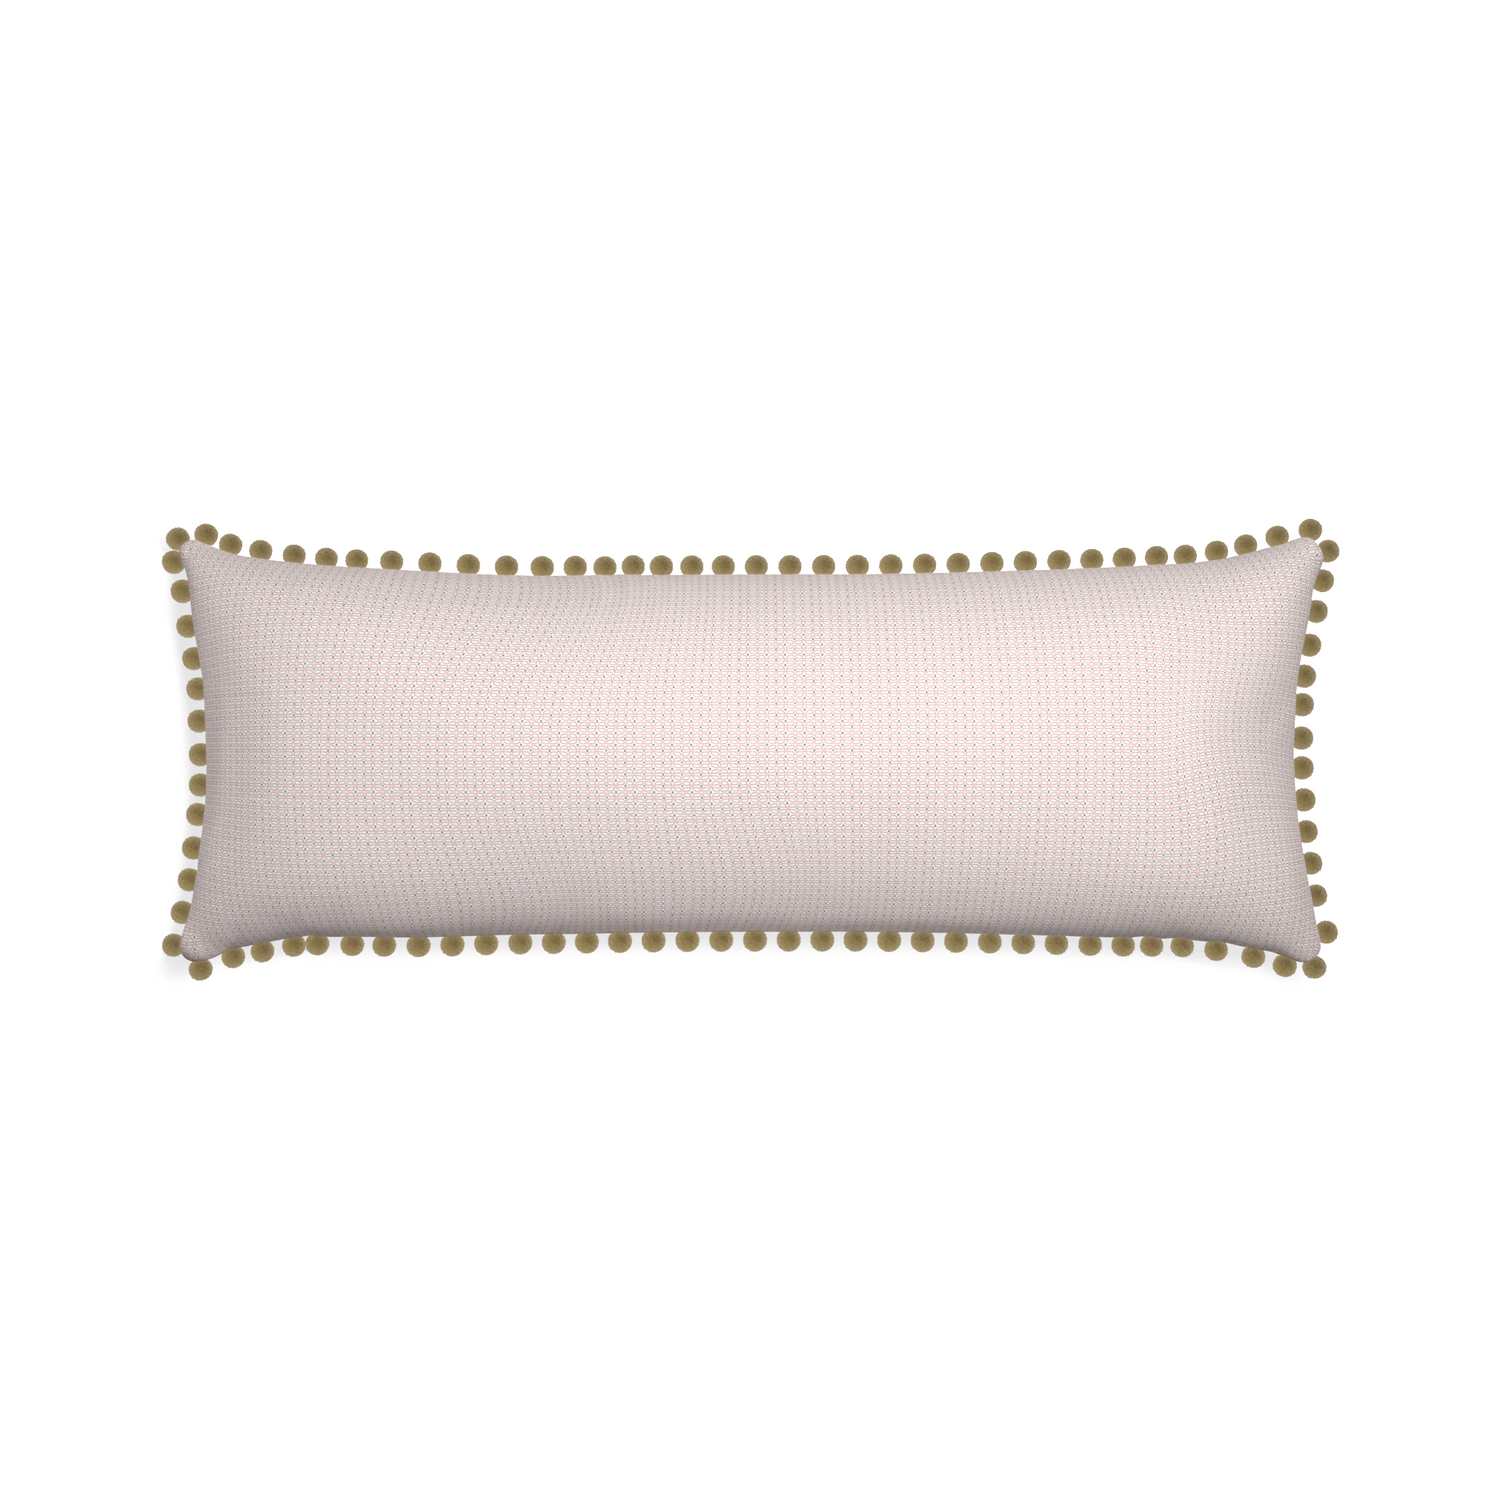 Xl-lumbar loomi pink custom pink geometricpillow with olive pom pom on white background